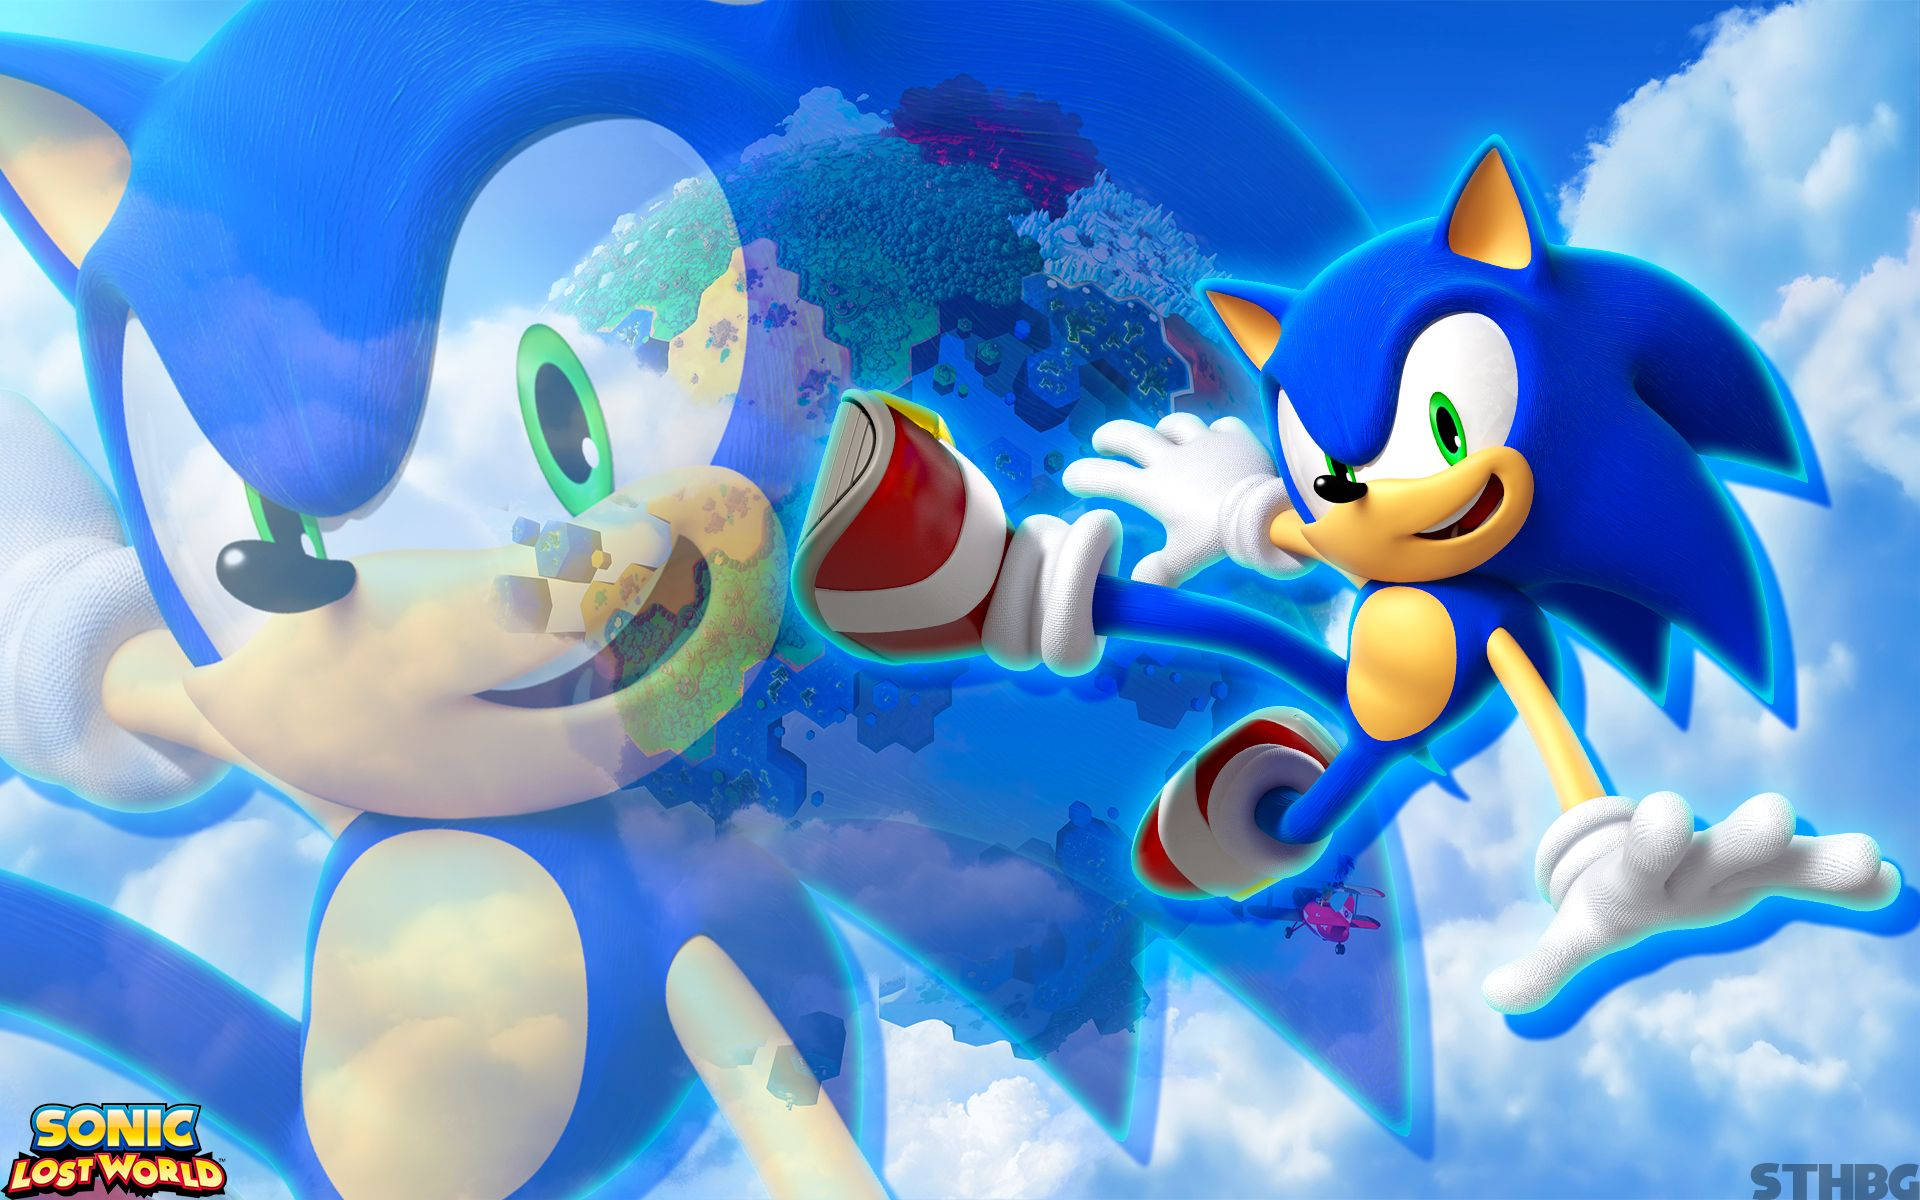 Sonic the Hedgehog Lost in a Magical World Wallpaper